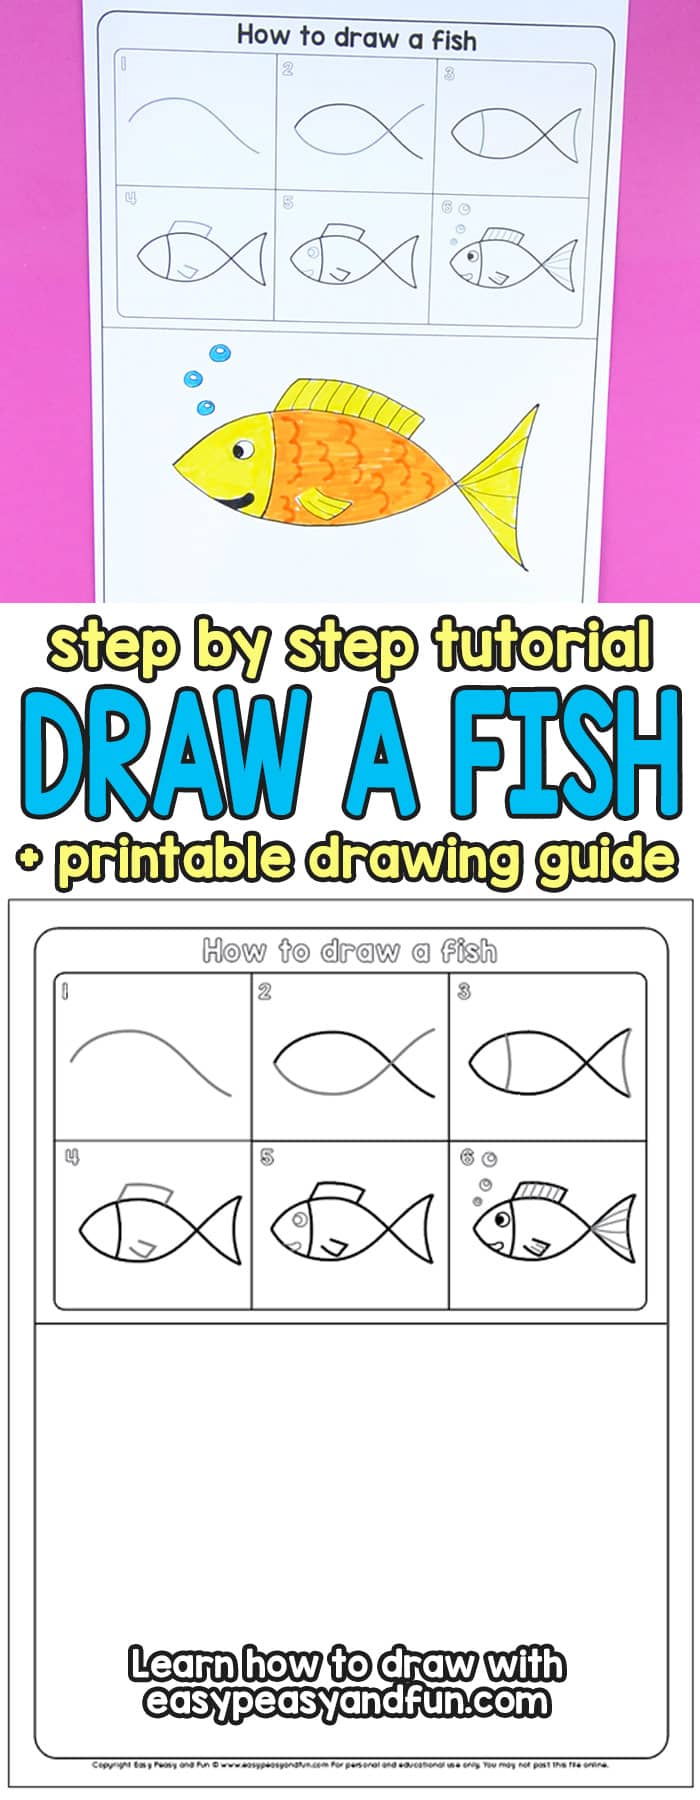 How to Draw a Fish Step by Step for Kids